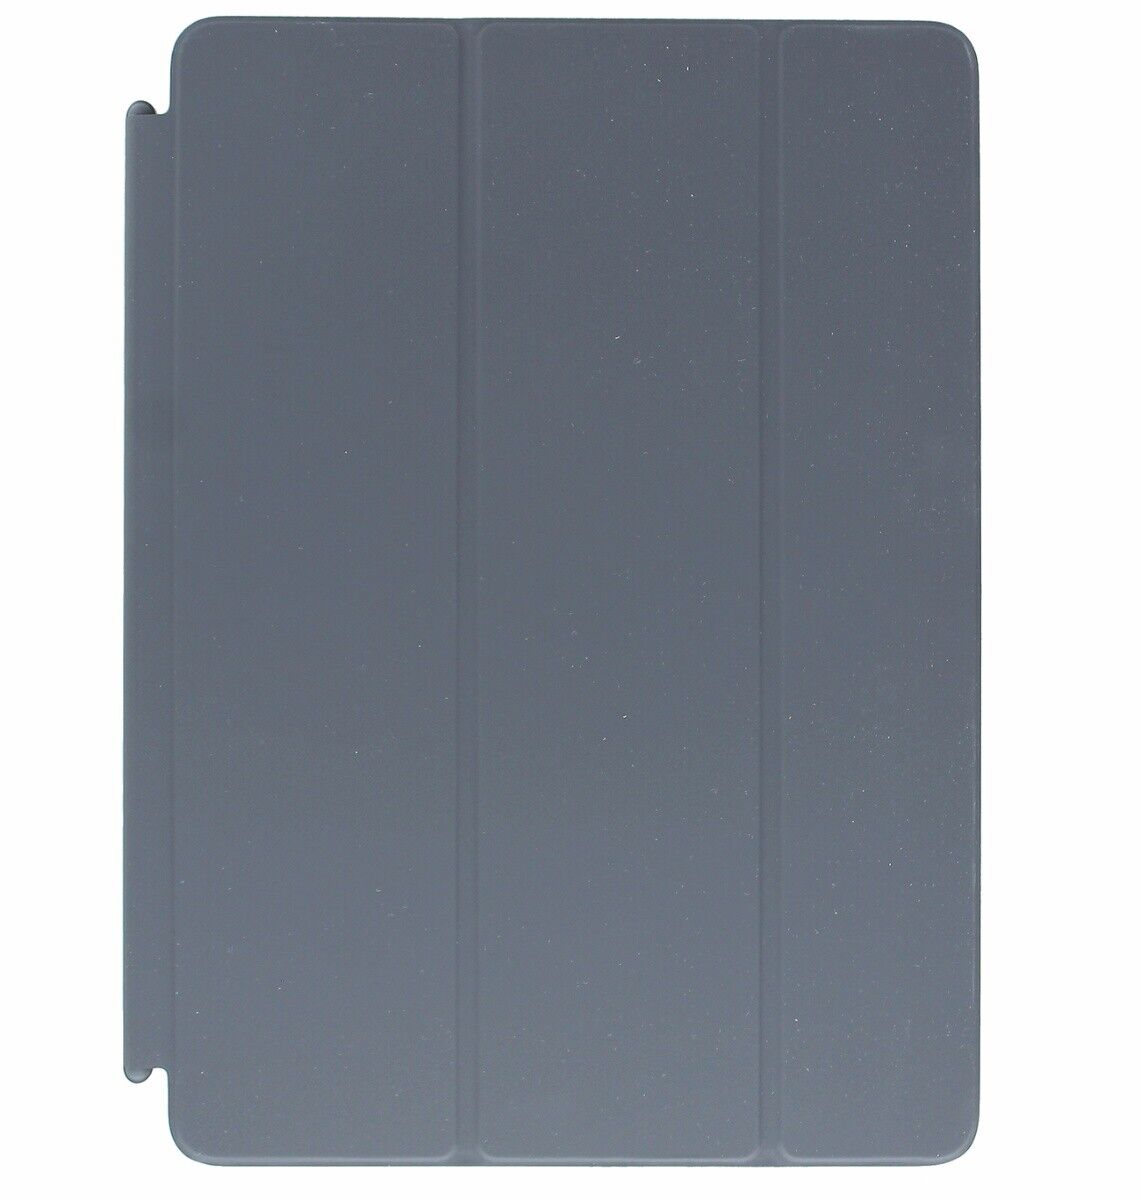 Apple Brand Smart Cover for Apple iPad 9.7 inch Tablets - Charcoal Gray